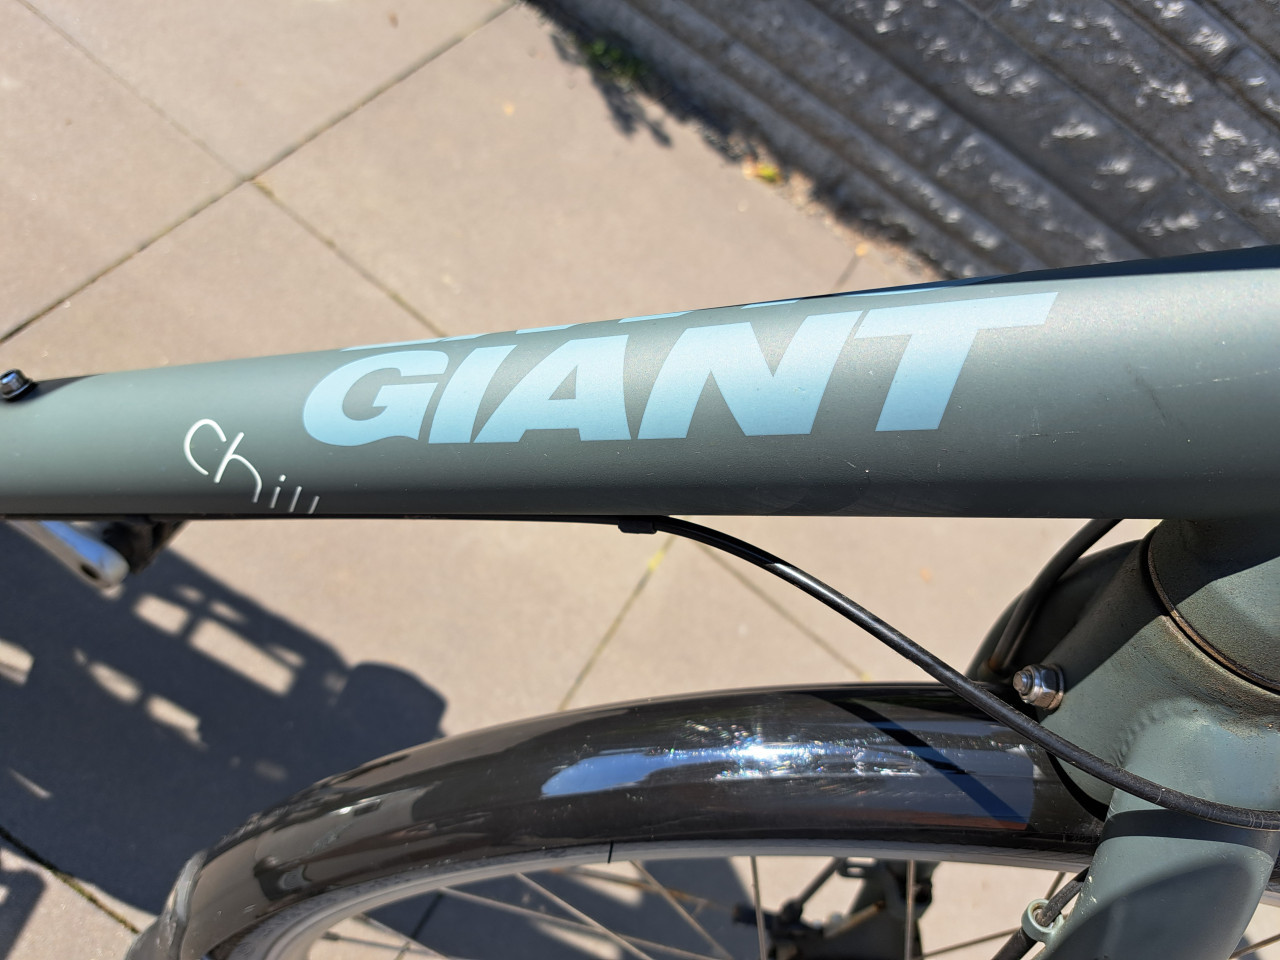 Giant Chill 1 GTS Herenfiets.